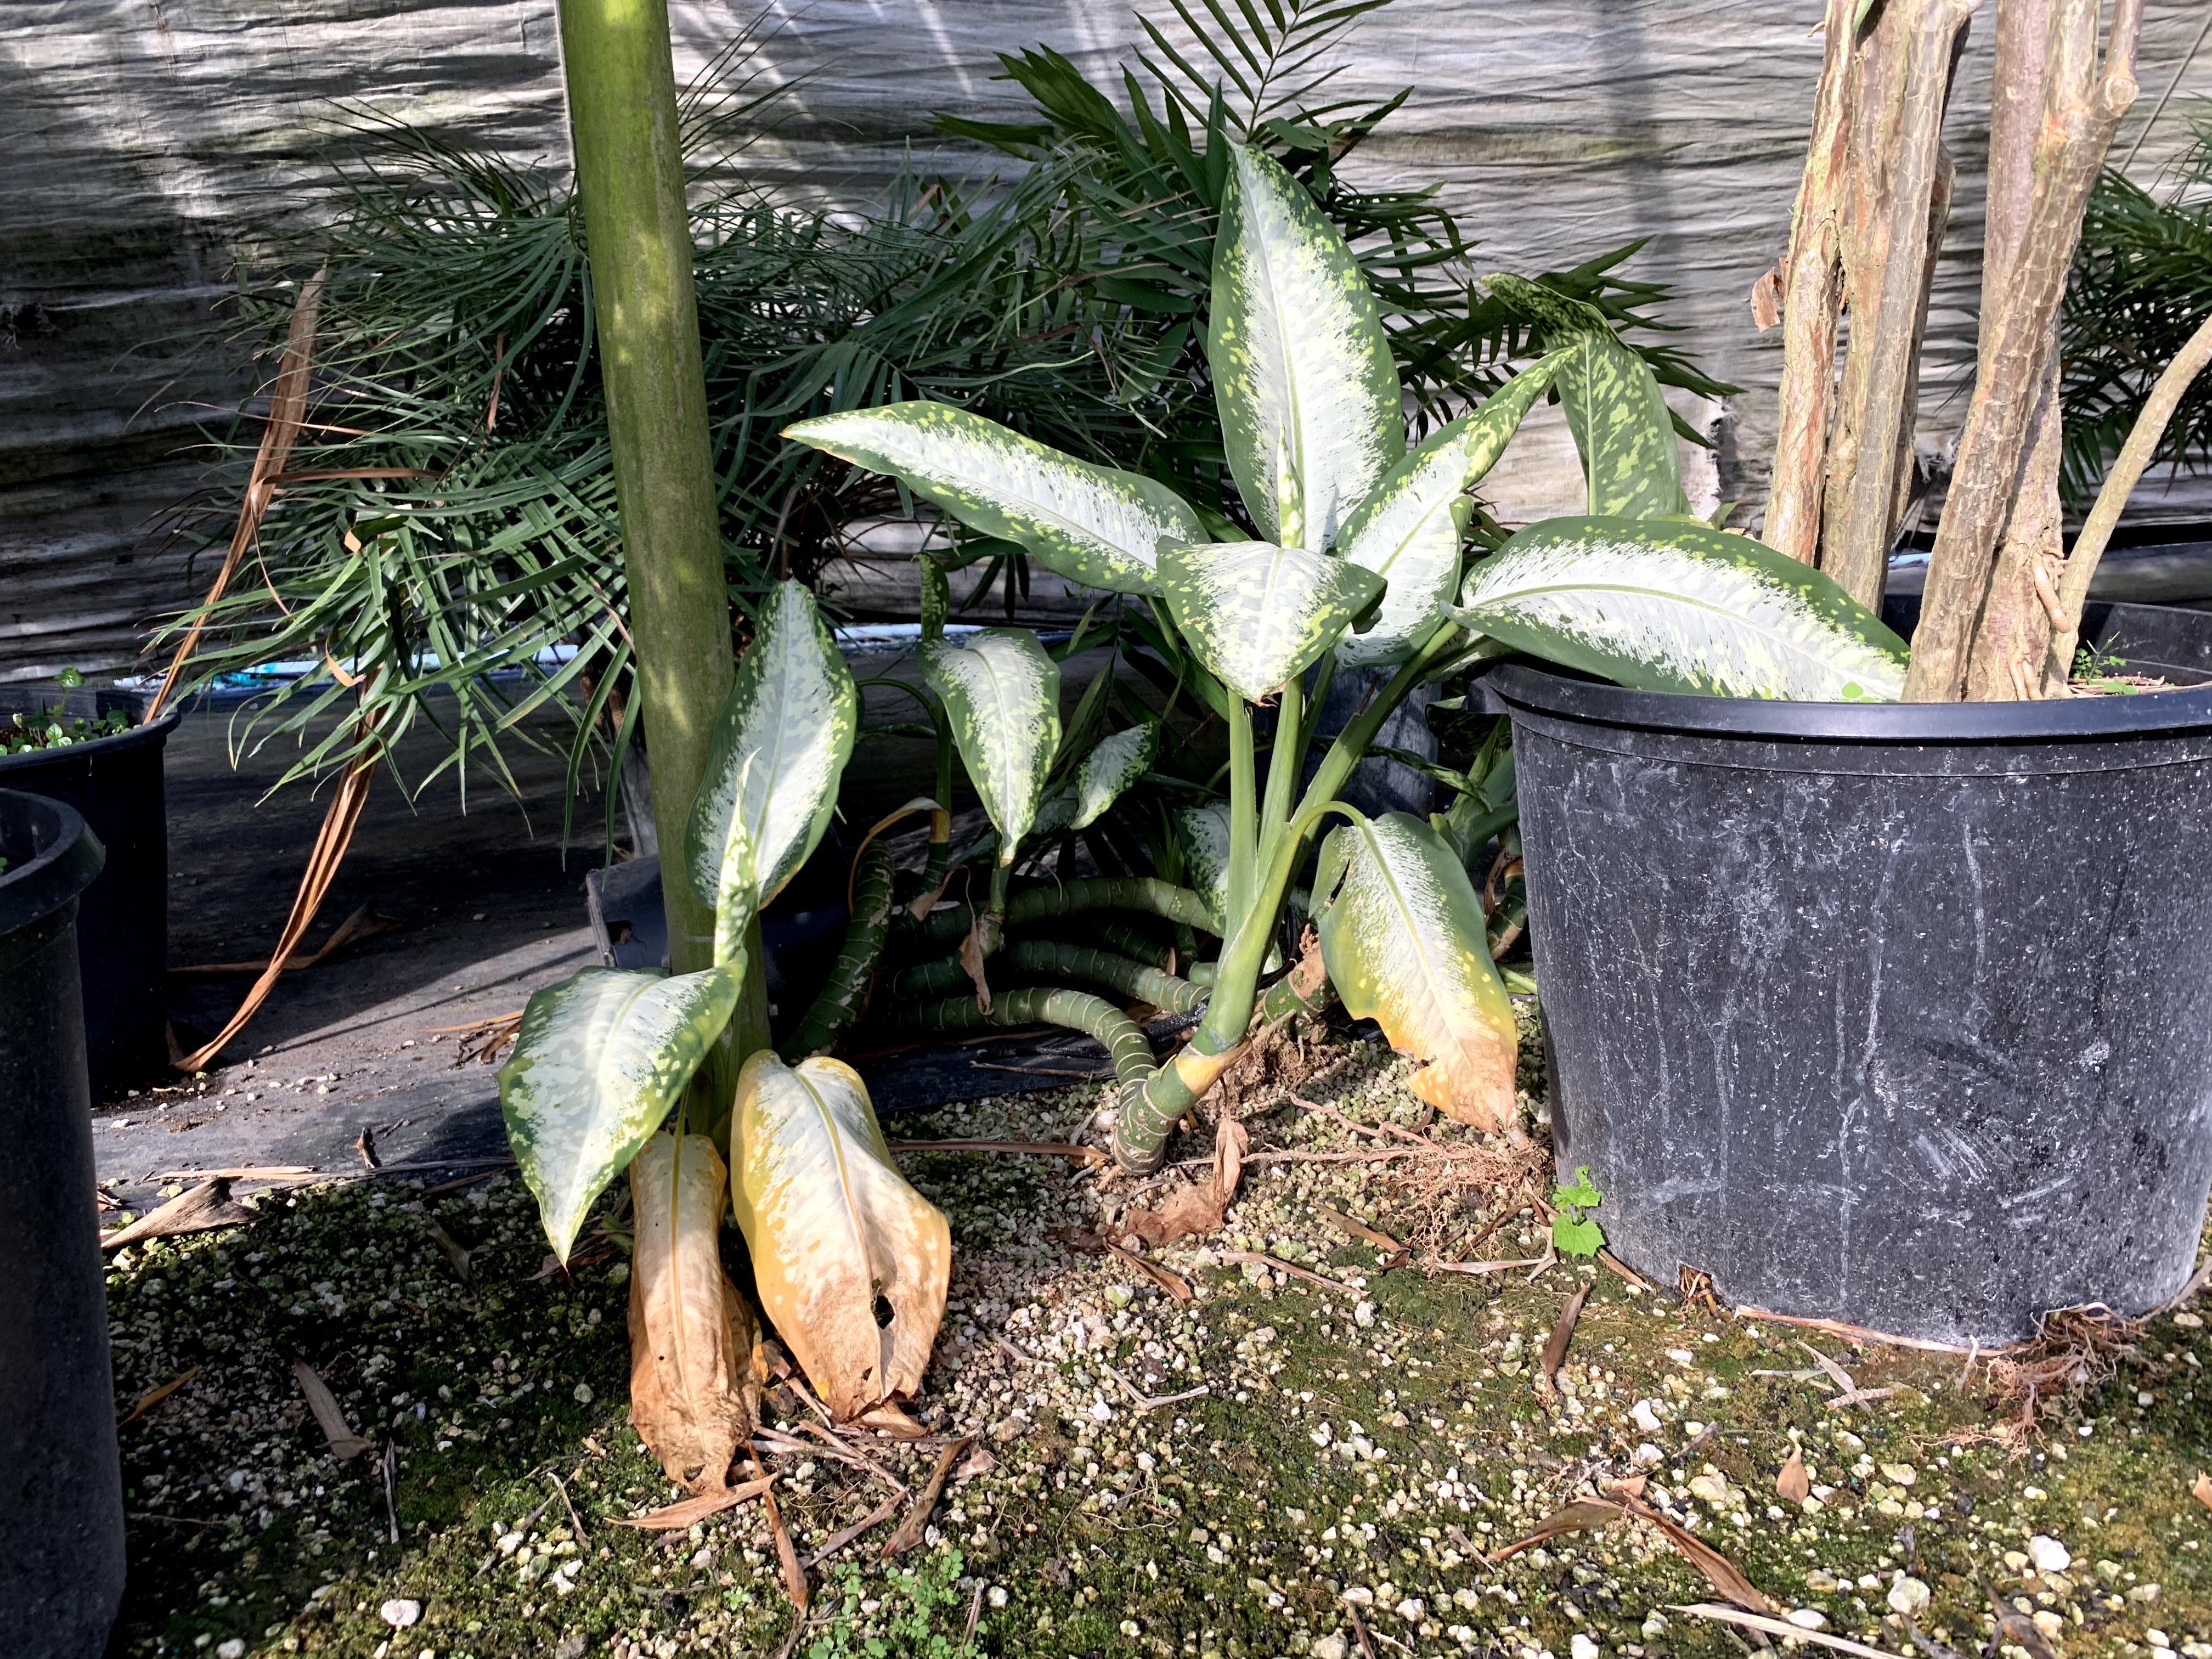 A dieffenbachia panther growing in the wild. It has aerial roots and yellowing basal leaves.